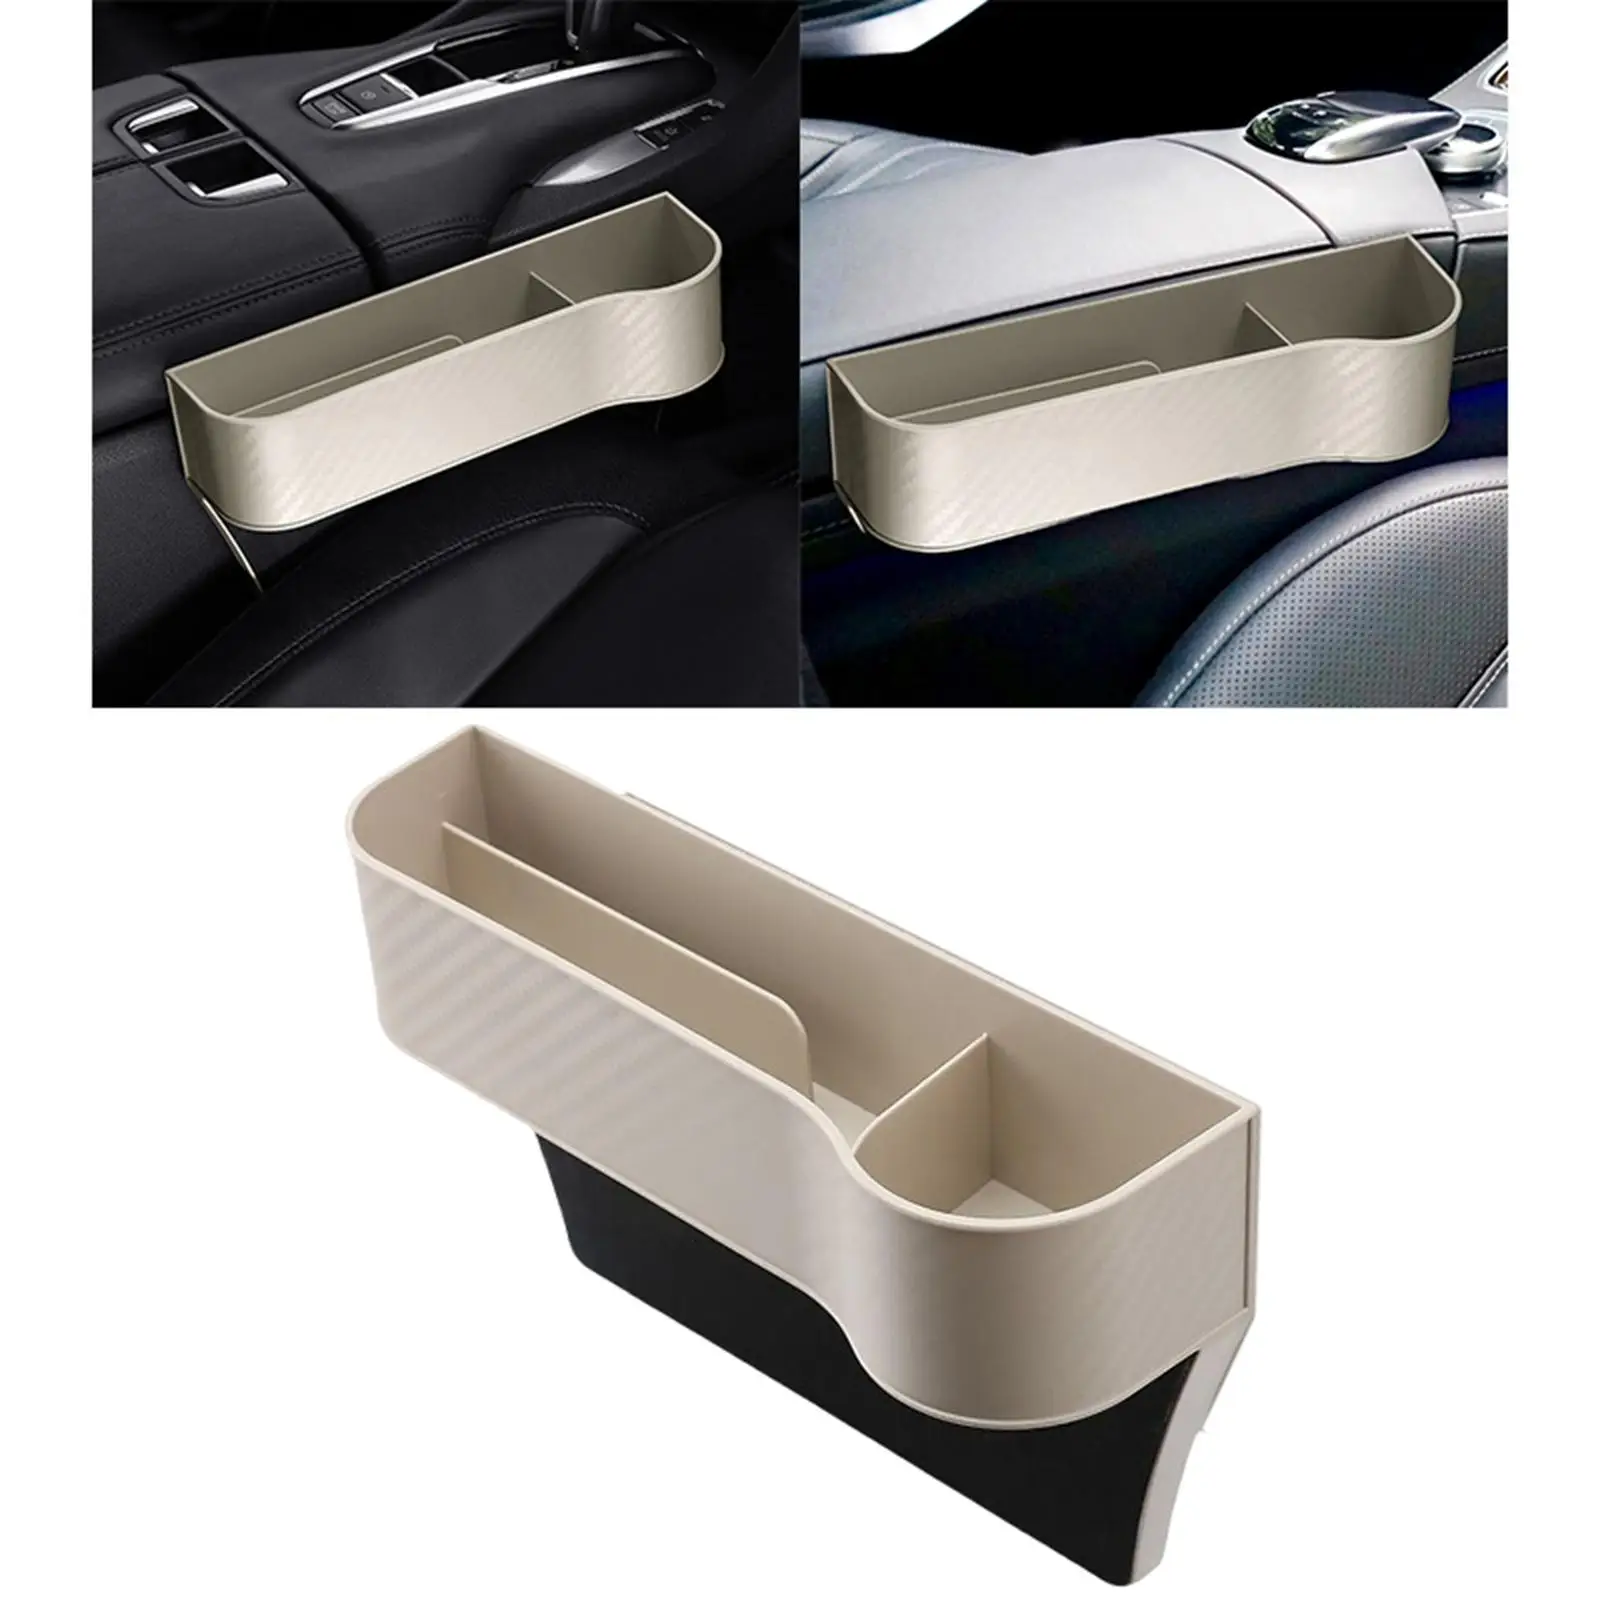 Car Front Seat Gap Organizer Premium Multifunctions Professional Insert Between The Seat and Console Made of ABS Plastic Durable